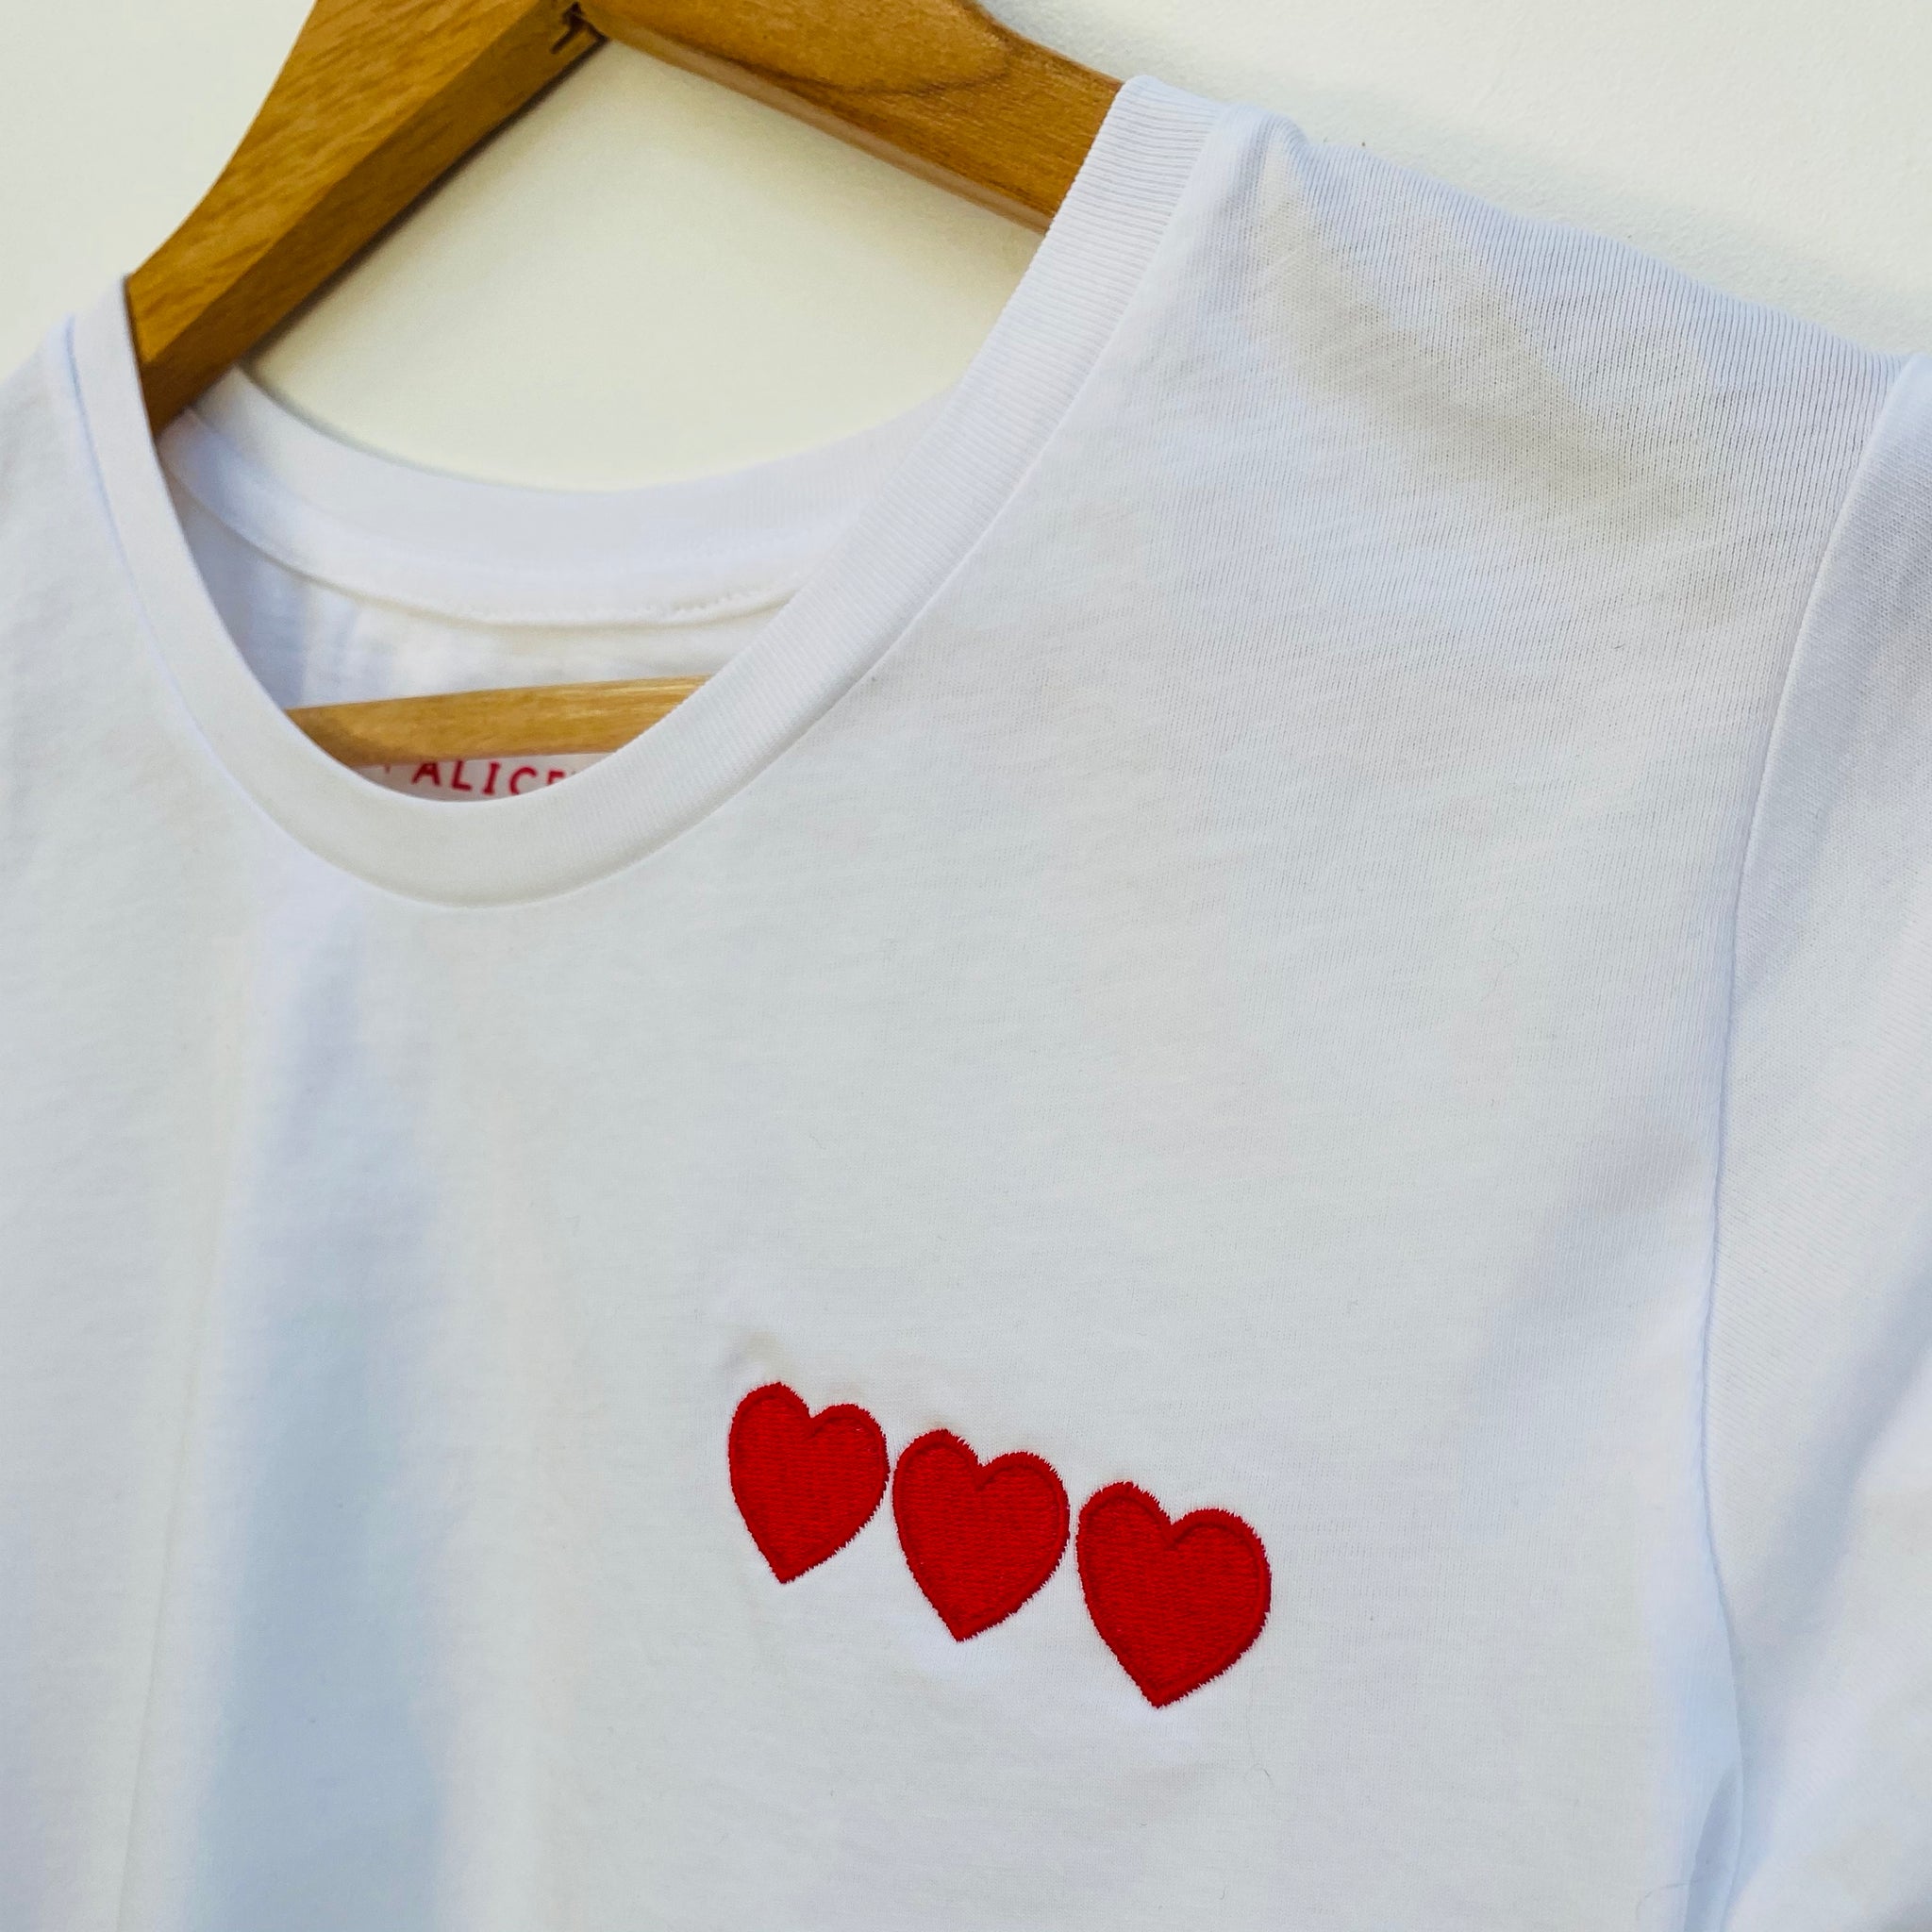 Triple Heart Embroidered White Tee - Ladies Fit